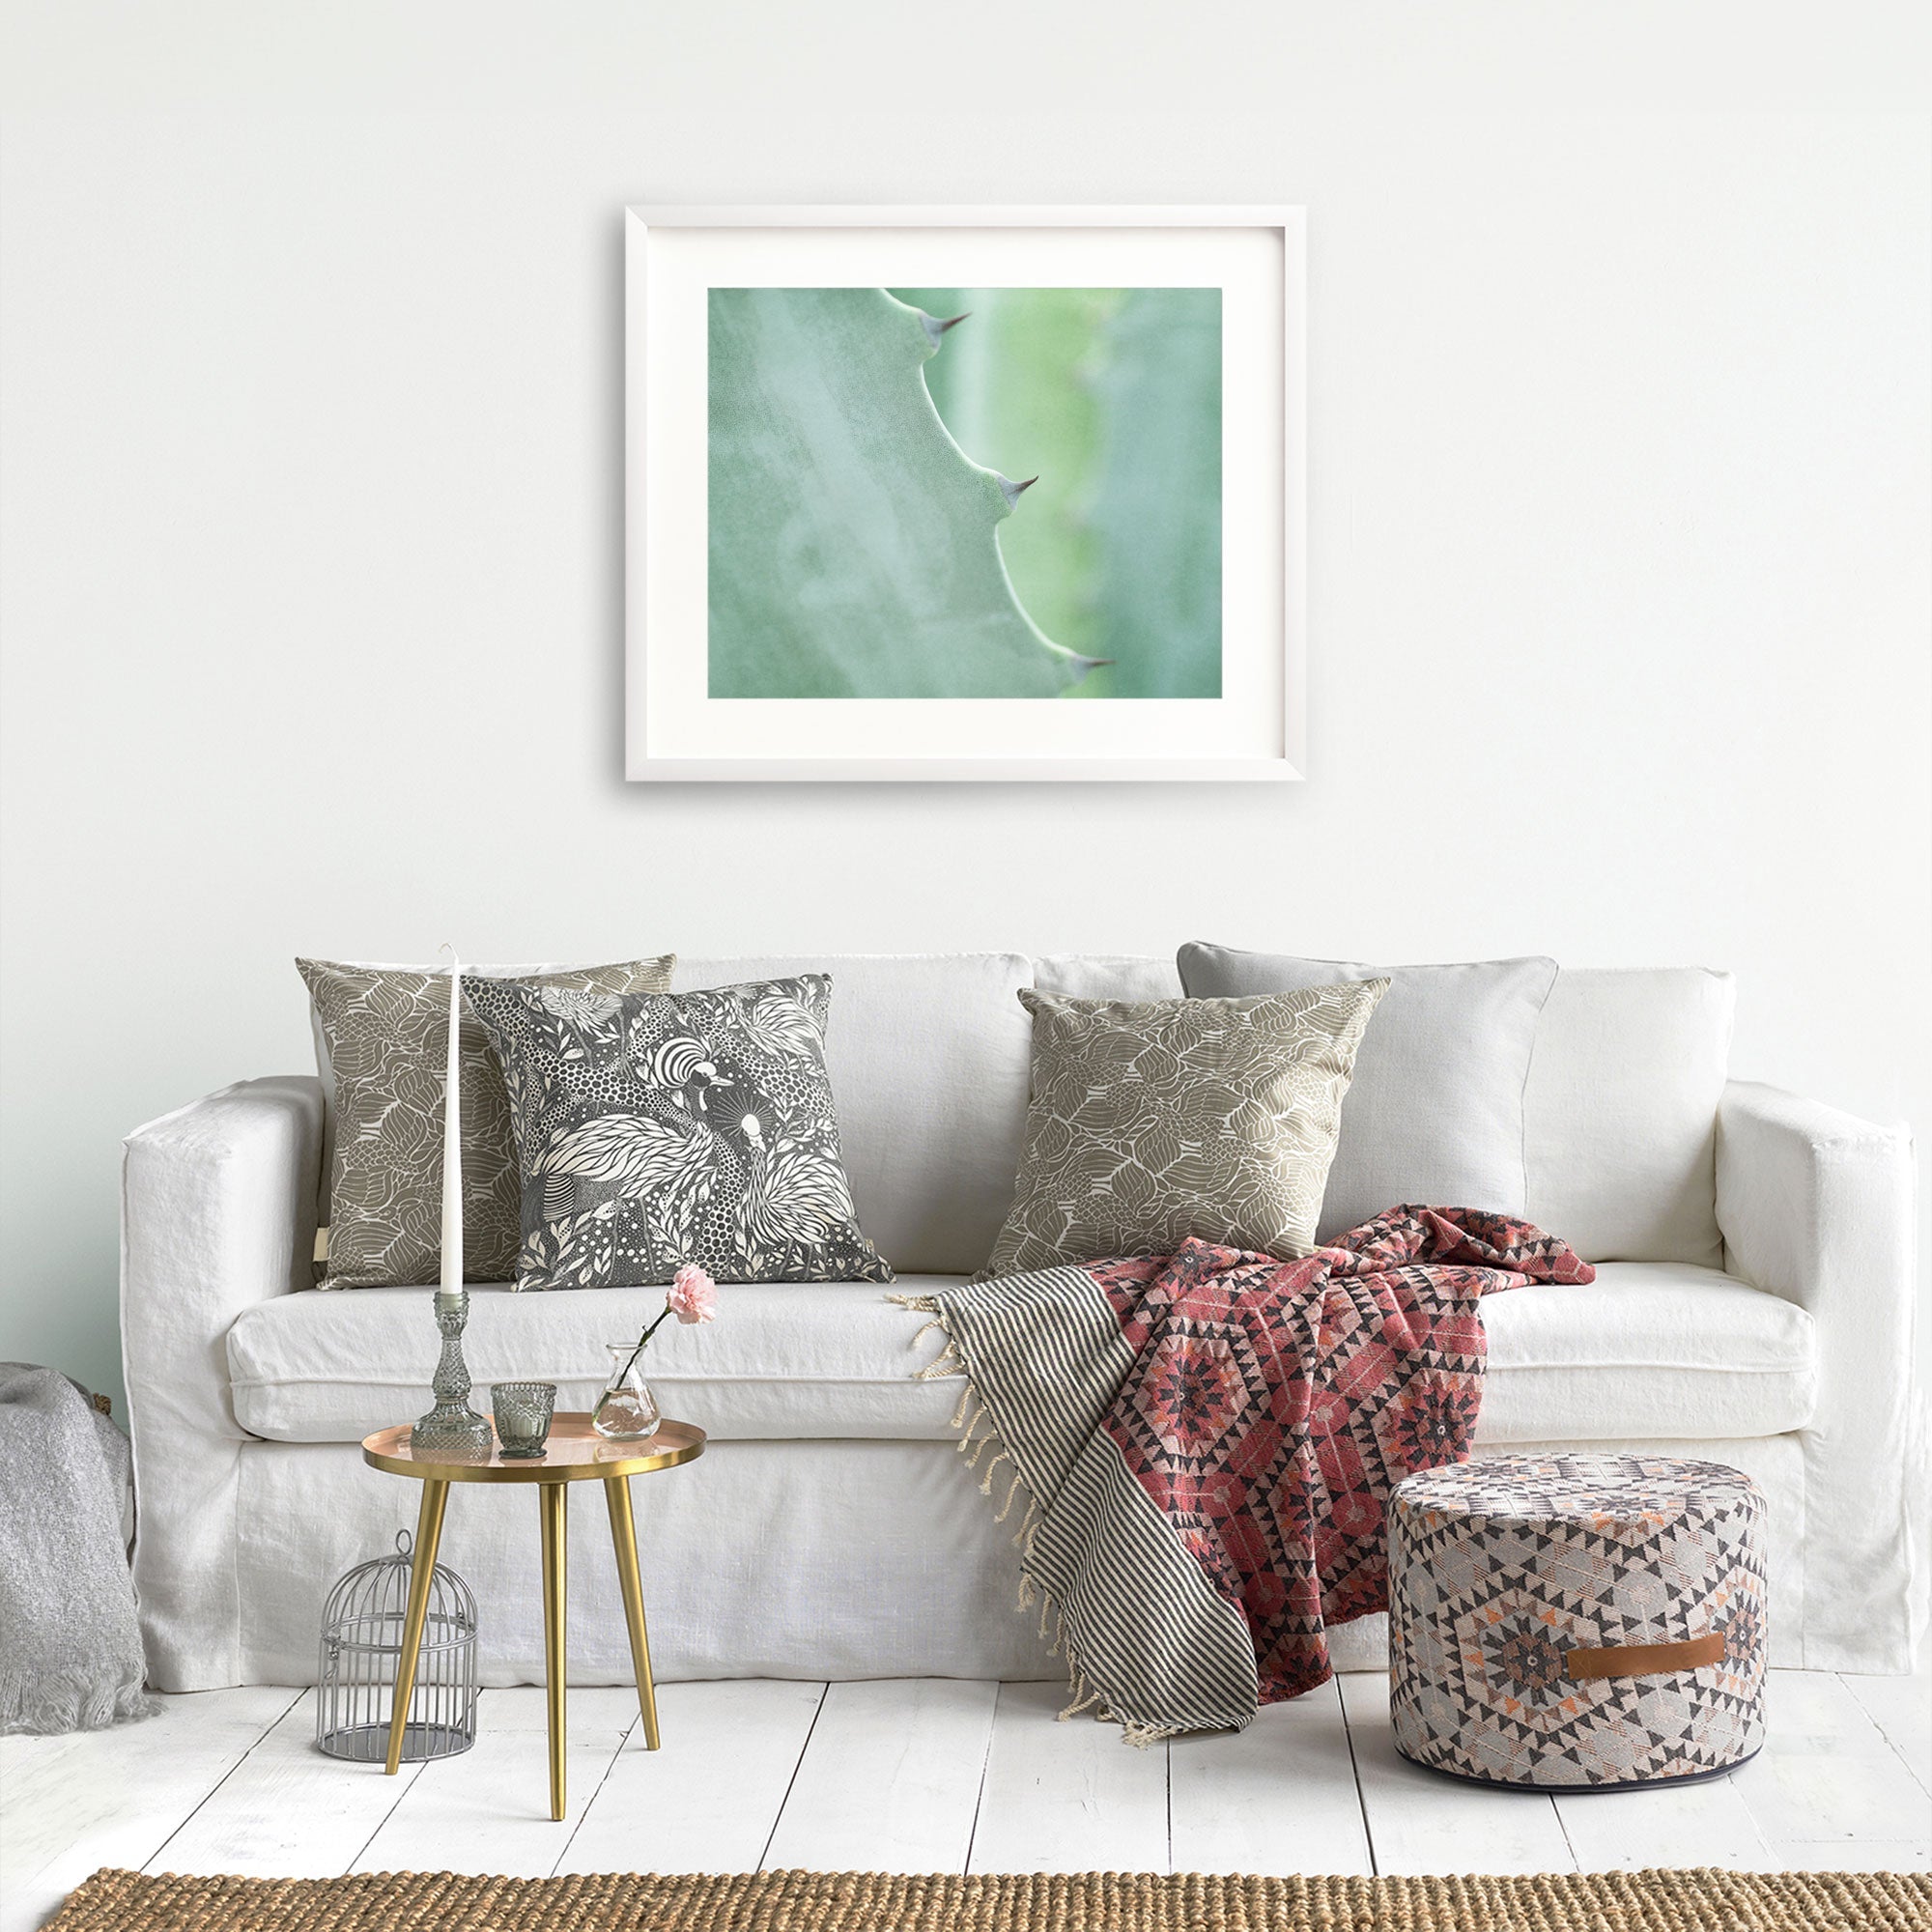 A cozy living room scene with a white couch adorned with patterned pillows, a red throw blanket, a small round table with a book and an Aloe Vera plant, a framed abstract art piece featuring the Mint Green Botanical Print 'Aloe Vera Spikes' from Offley Green.